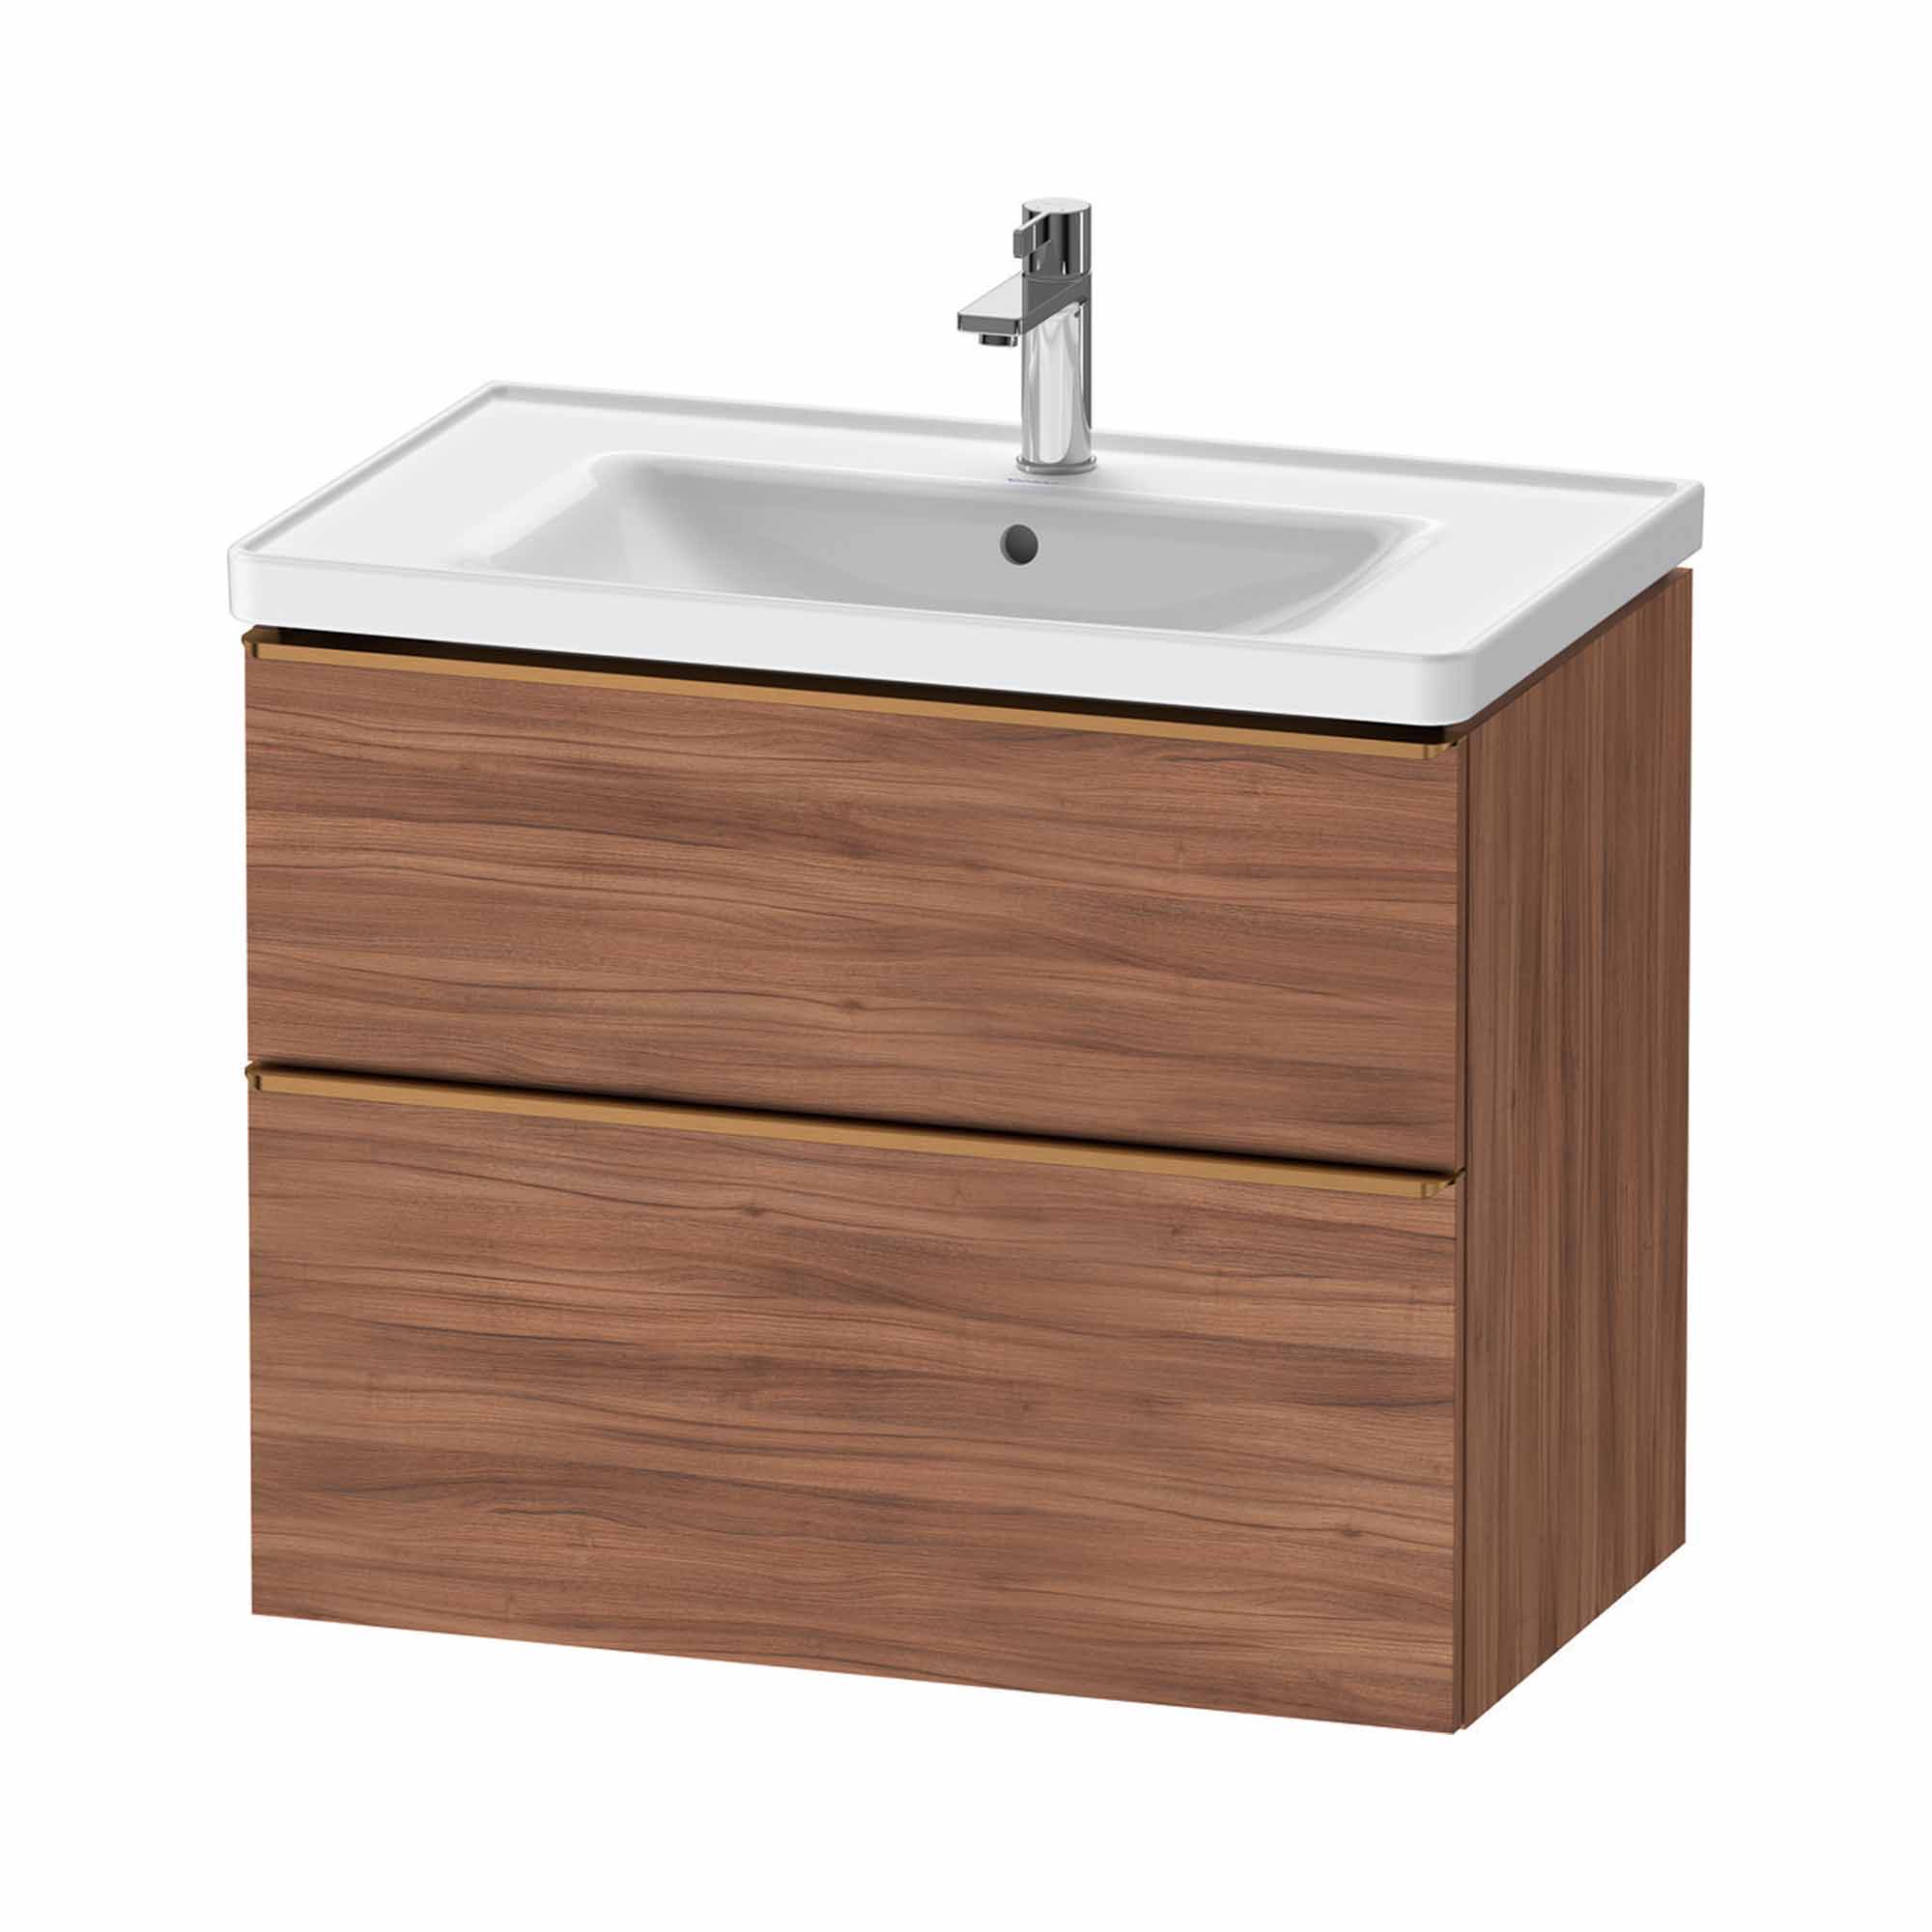 duravit d-neo 800mm wall mounted vanity unit with d-neo basin walnut brushed bronze handles